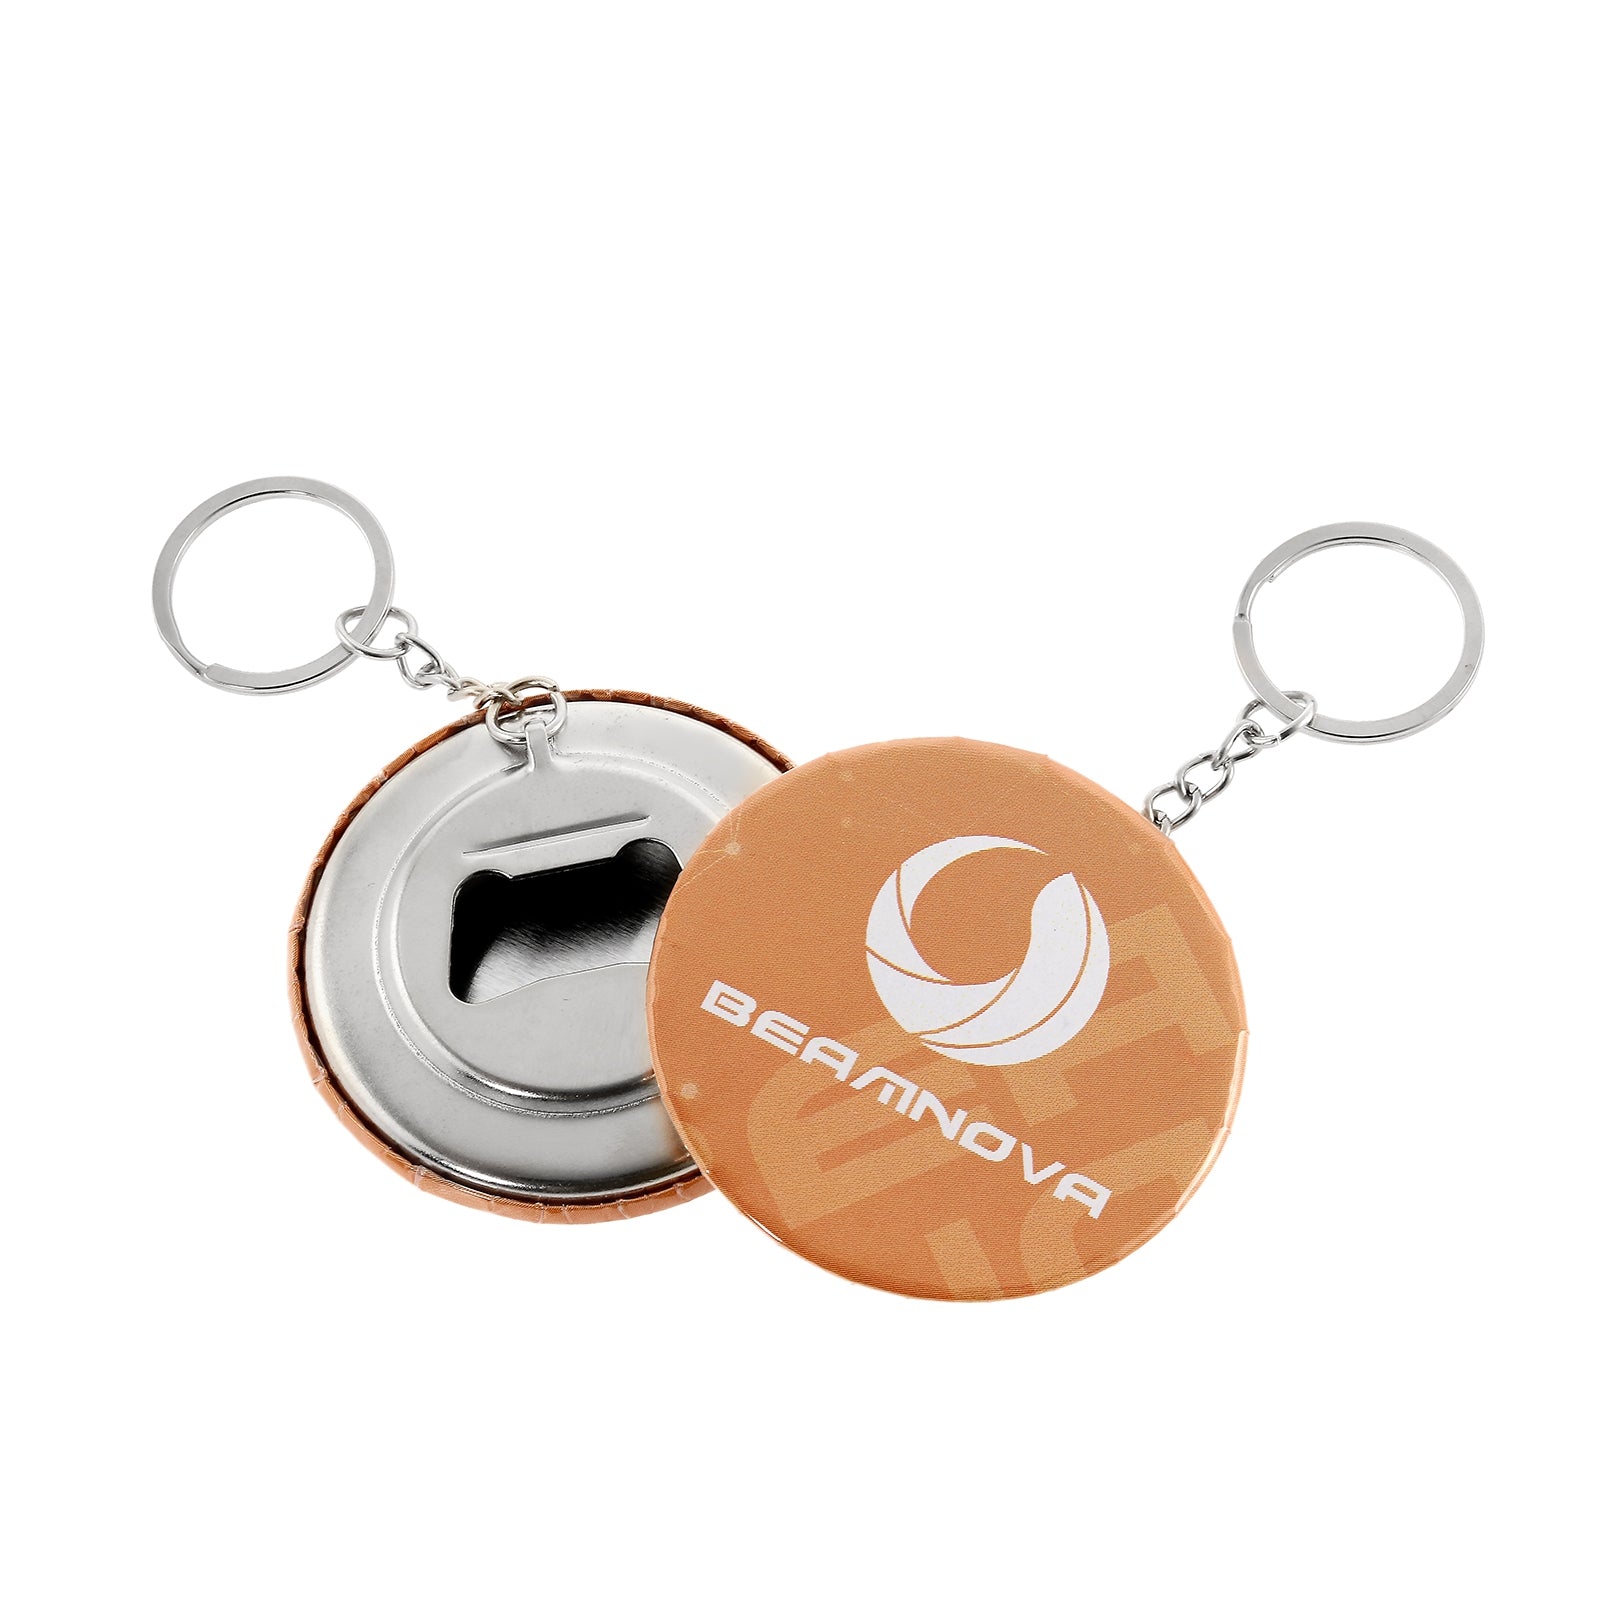 New Full Circle Keychain Bottle Opener Accessories - Other